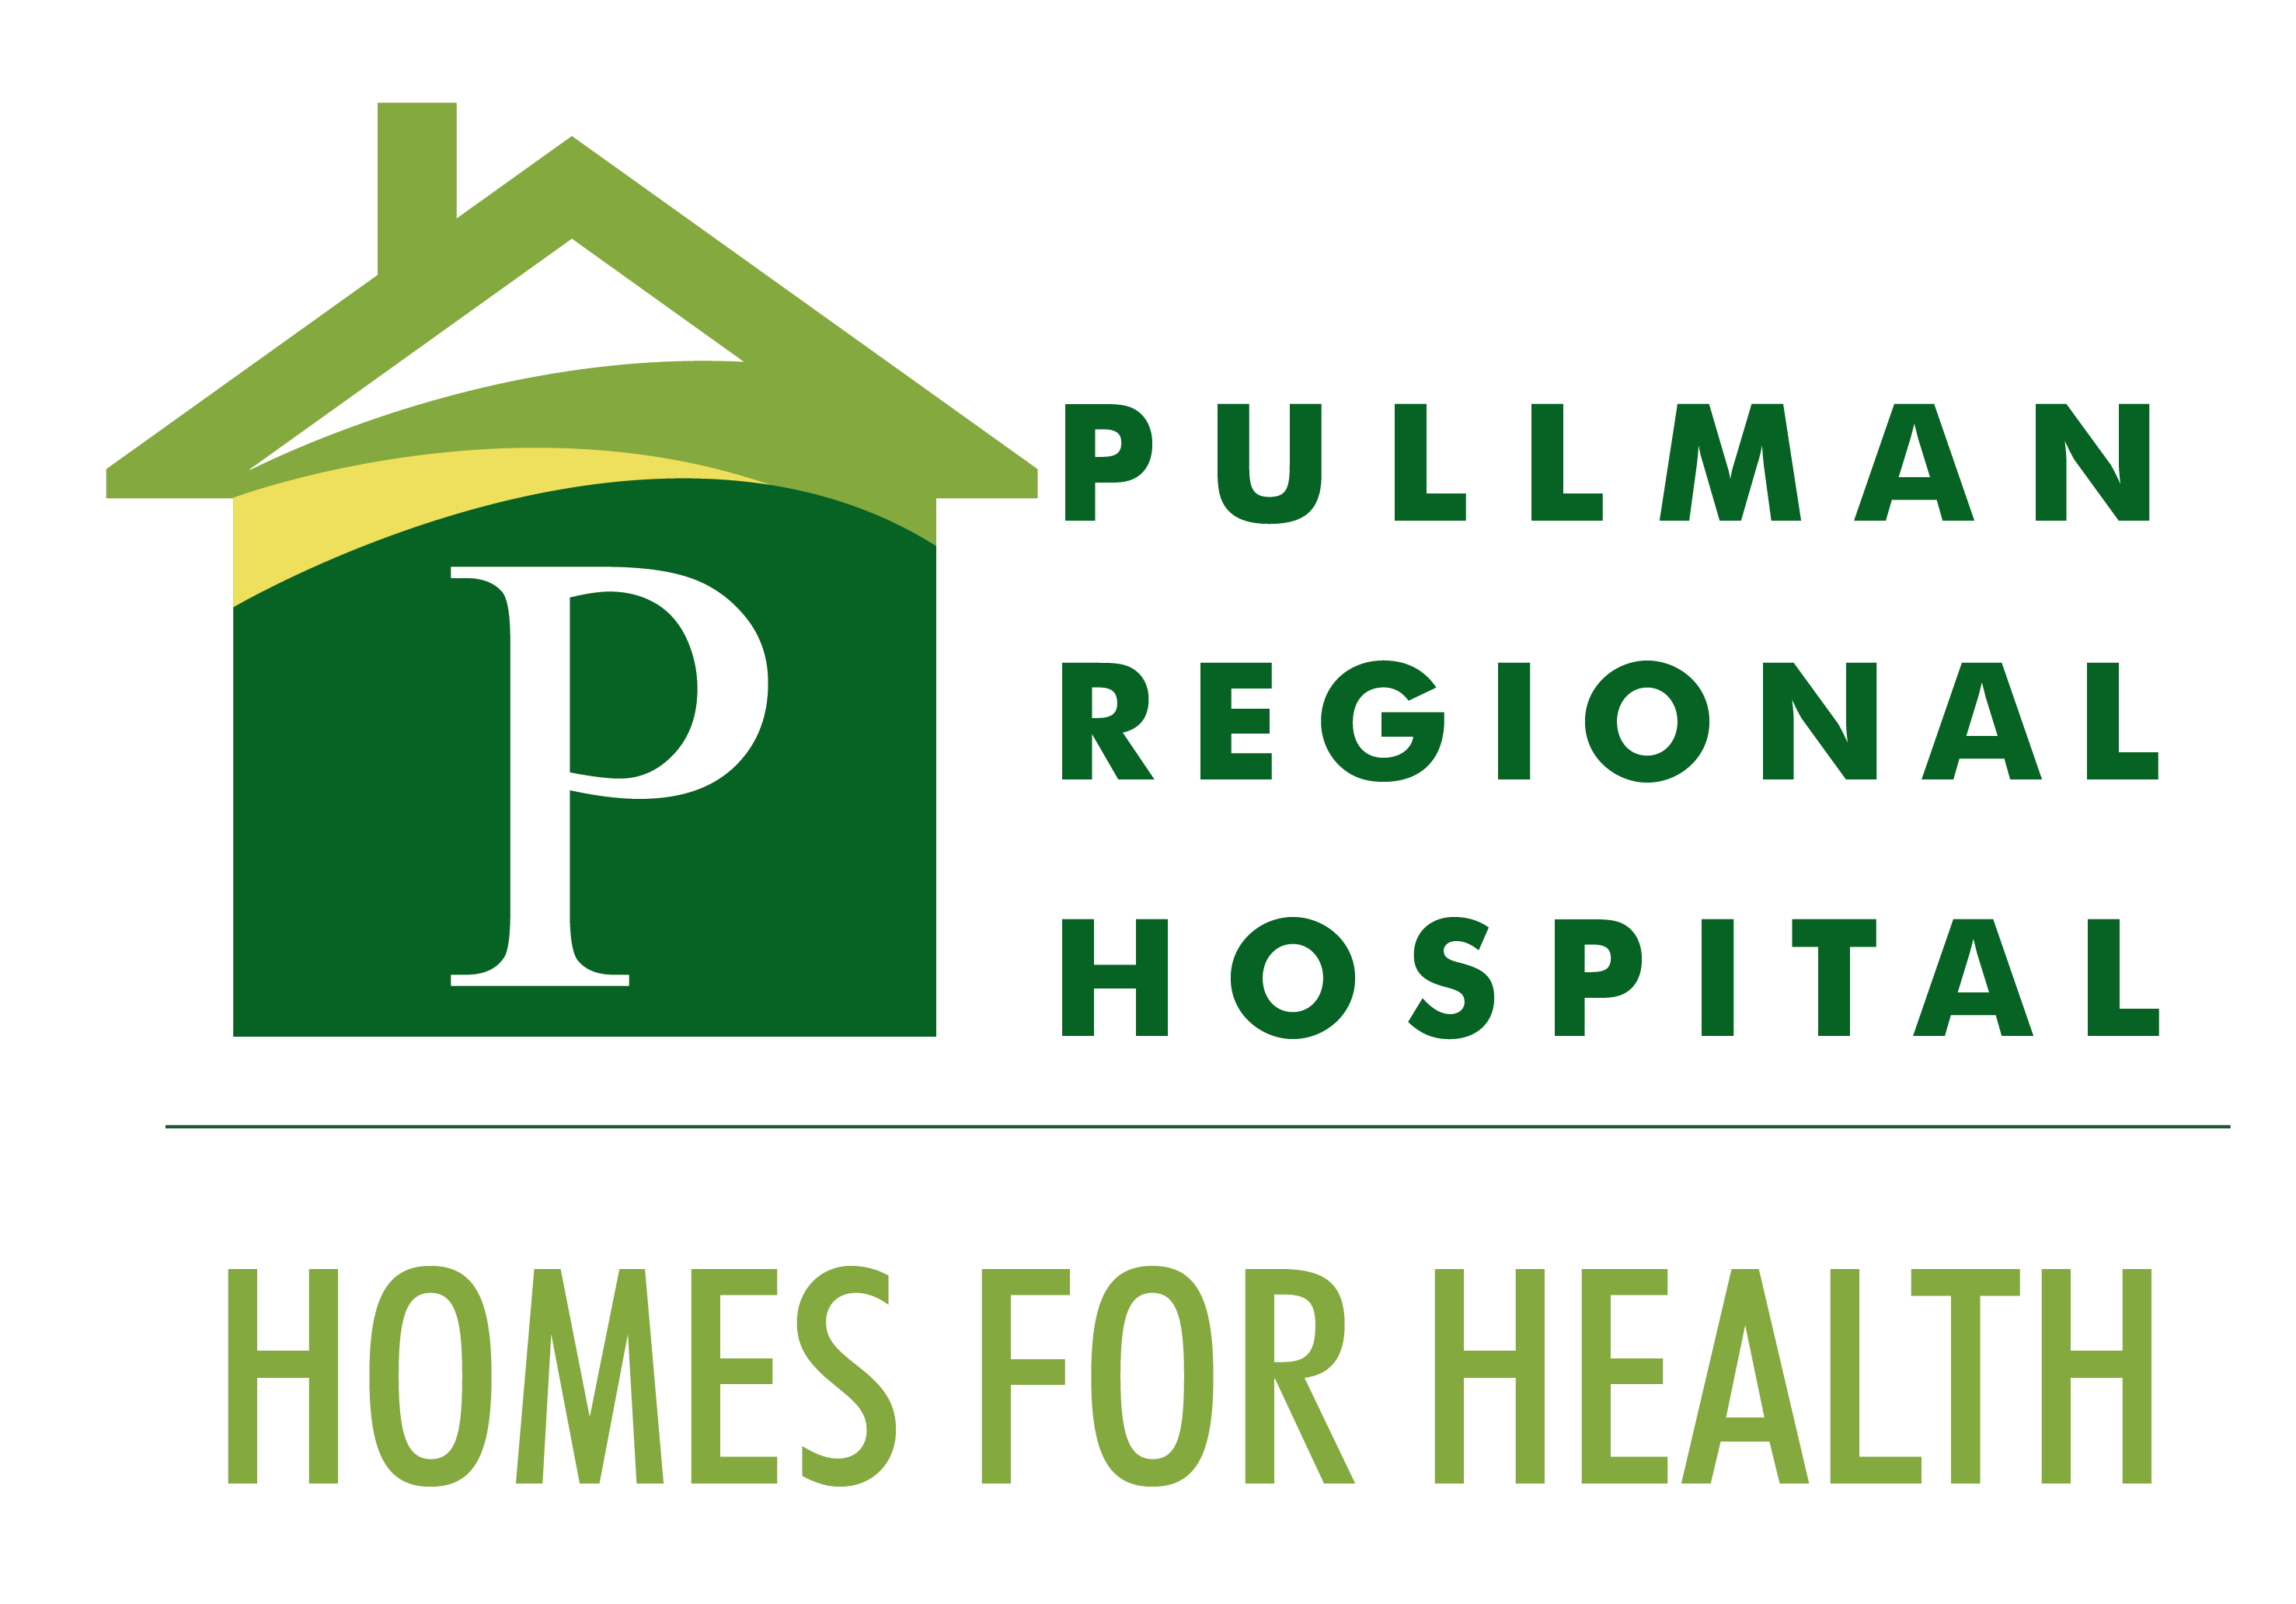 Local Brokers and Realtors Support Pullman Regional Hospital Through Home Sales